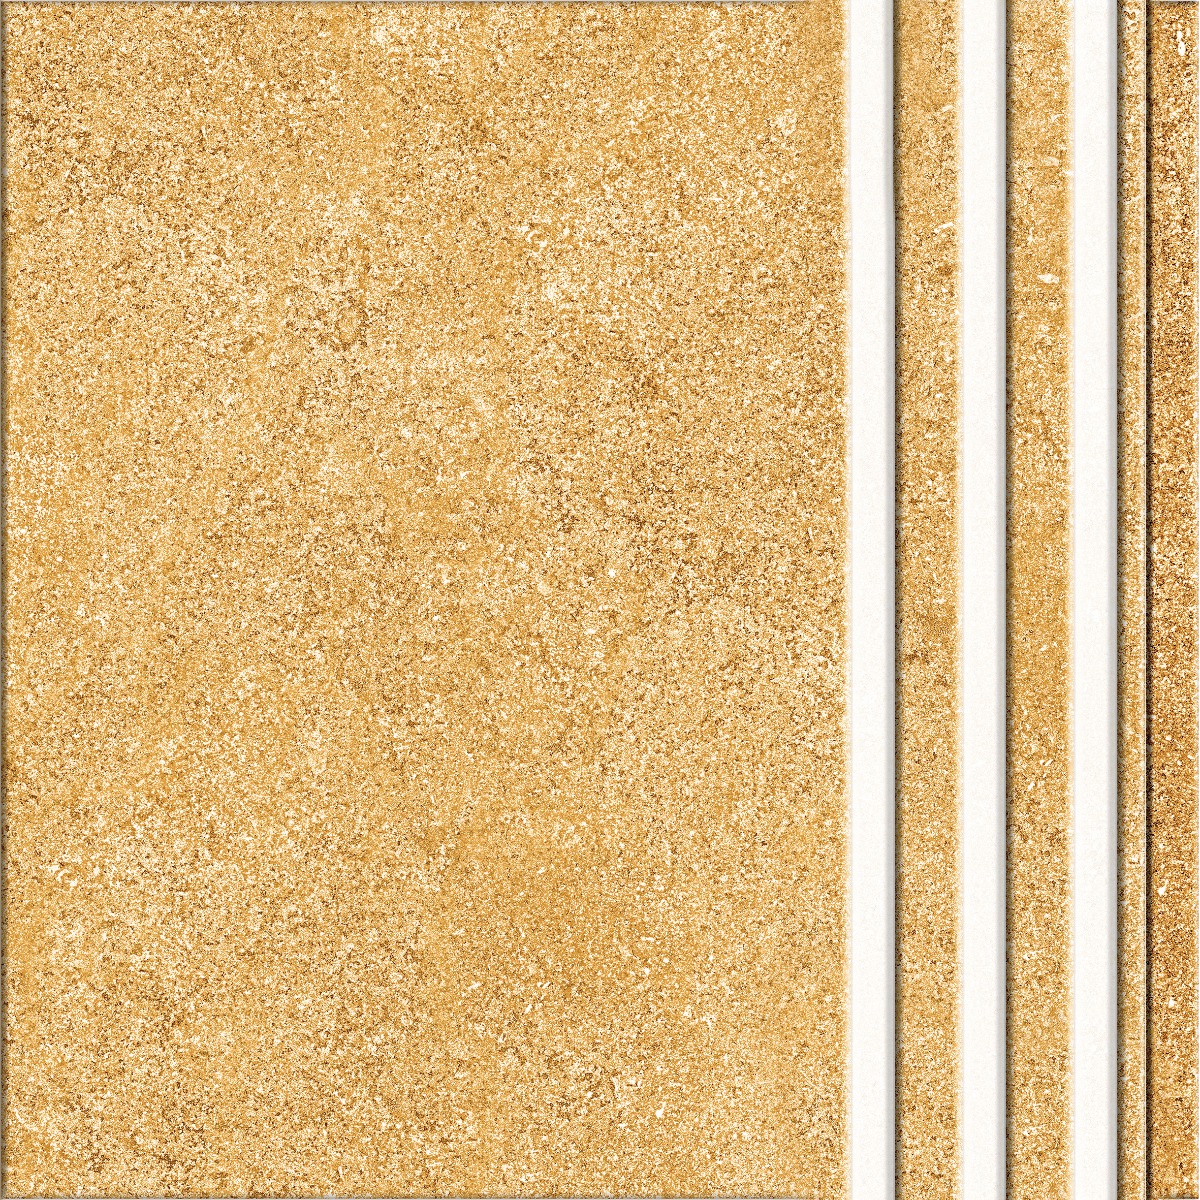 Vitrified Tiles for Step Stairs Tiles